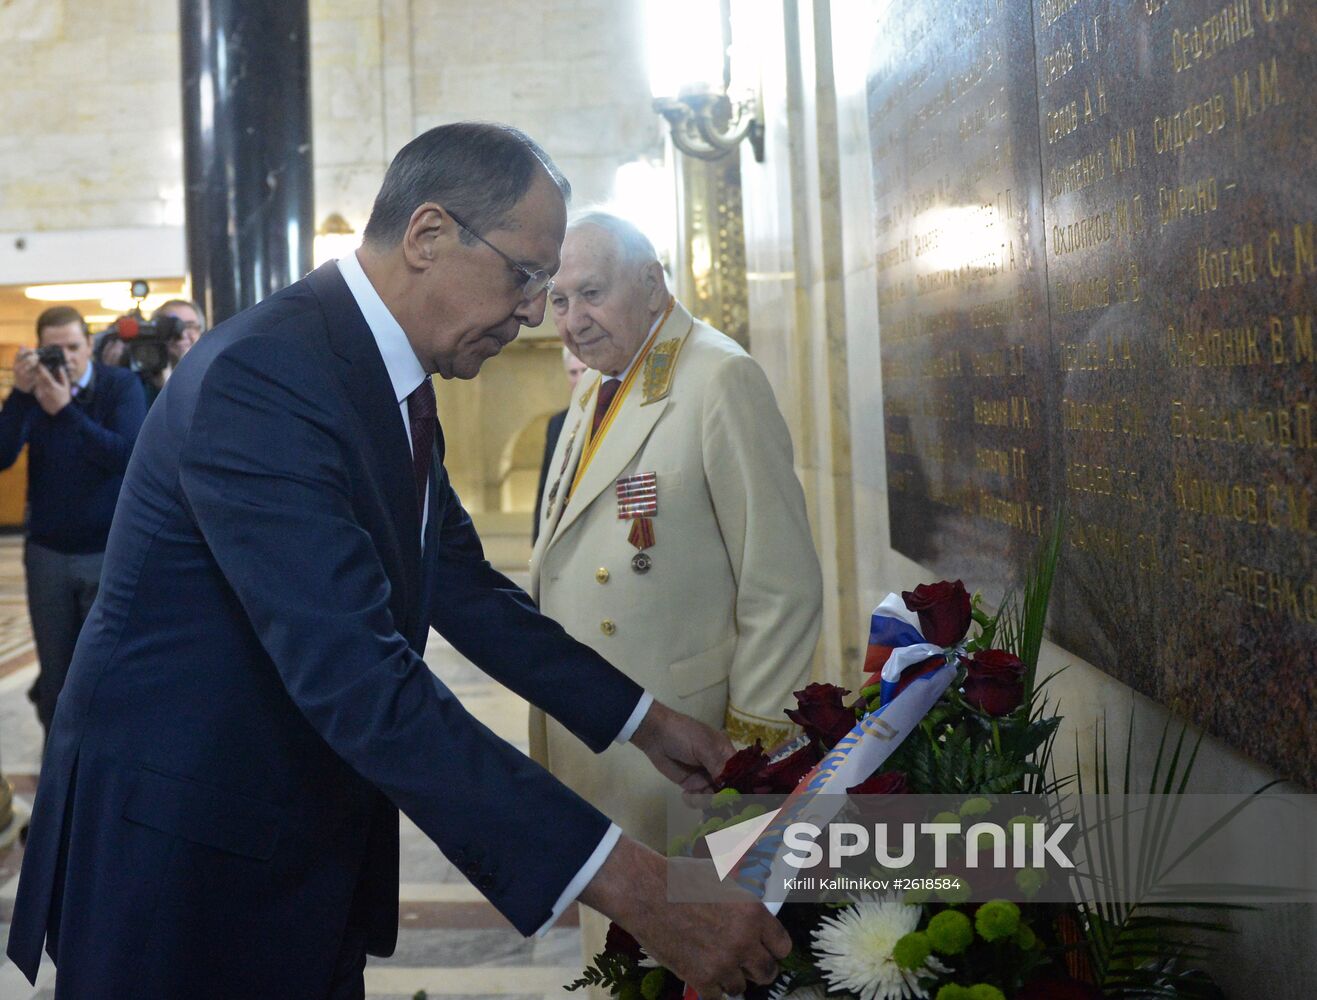 Russian Foreign Minister Sergei Lavrov lays flowers at memorial plaques in the run-up to the 70th Victory Day anniversary